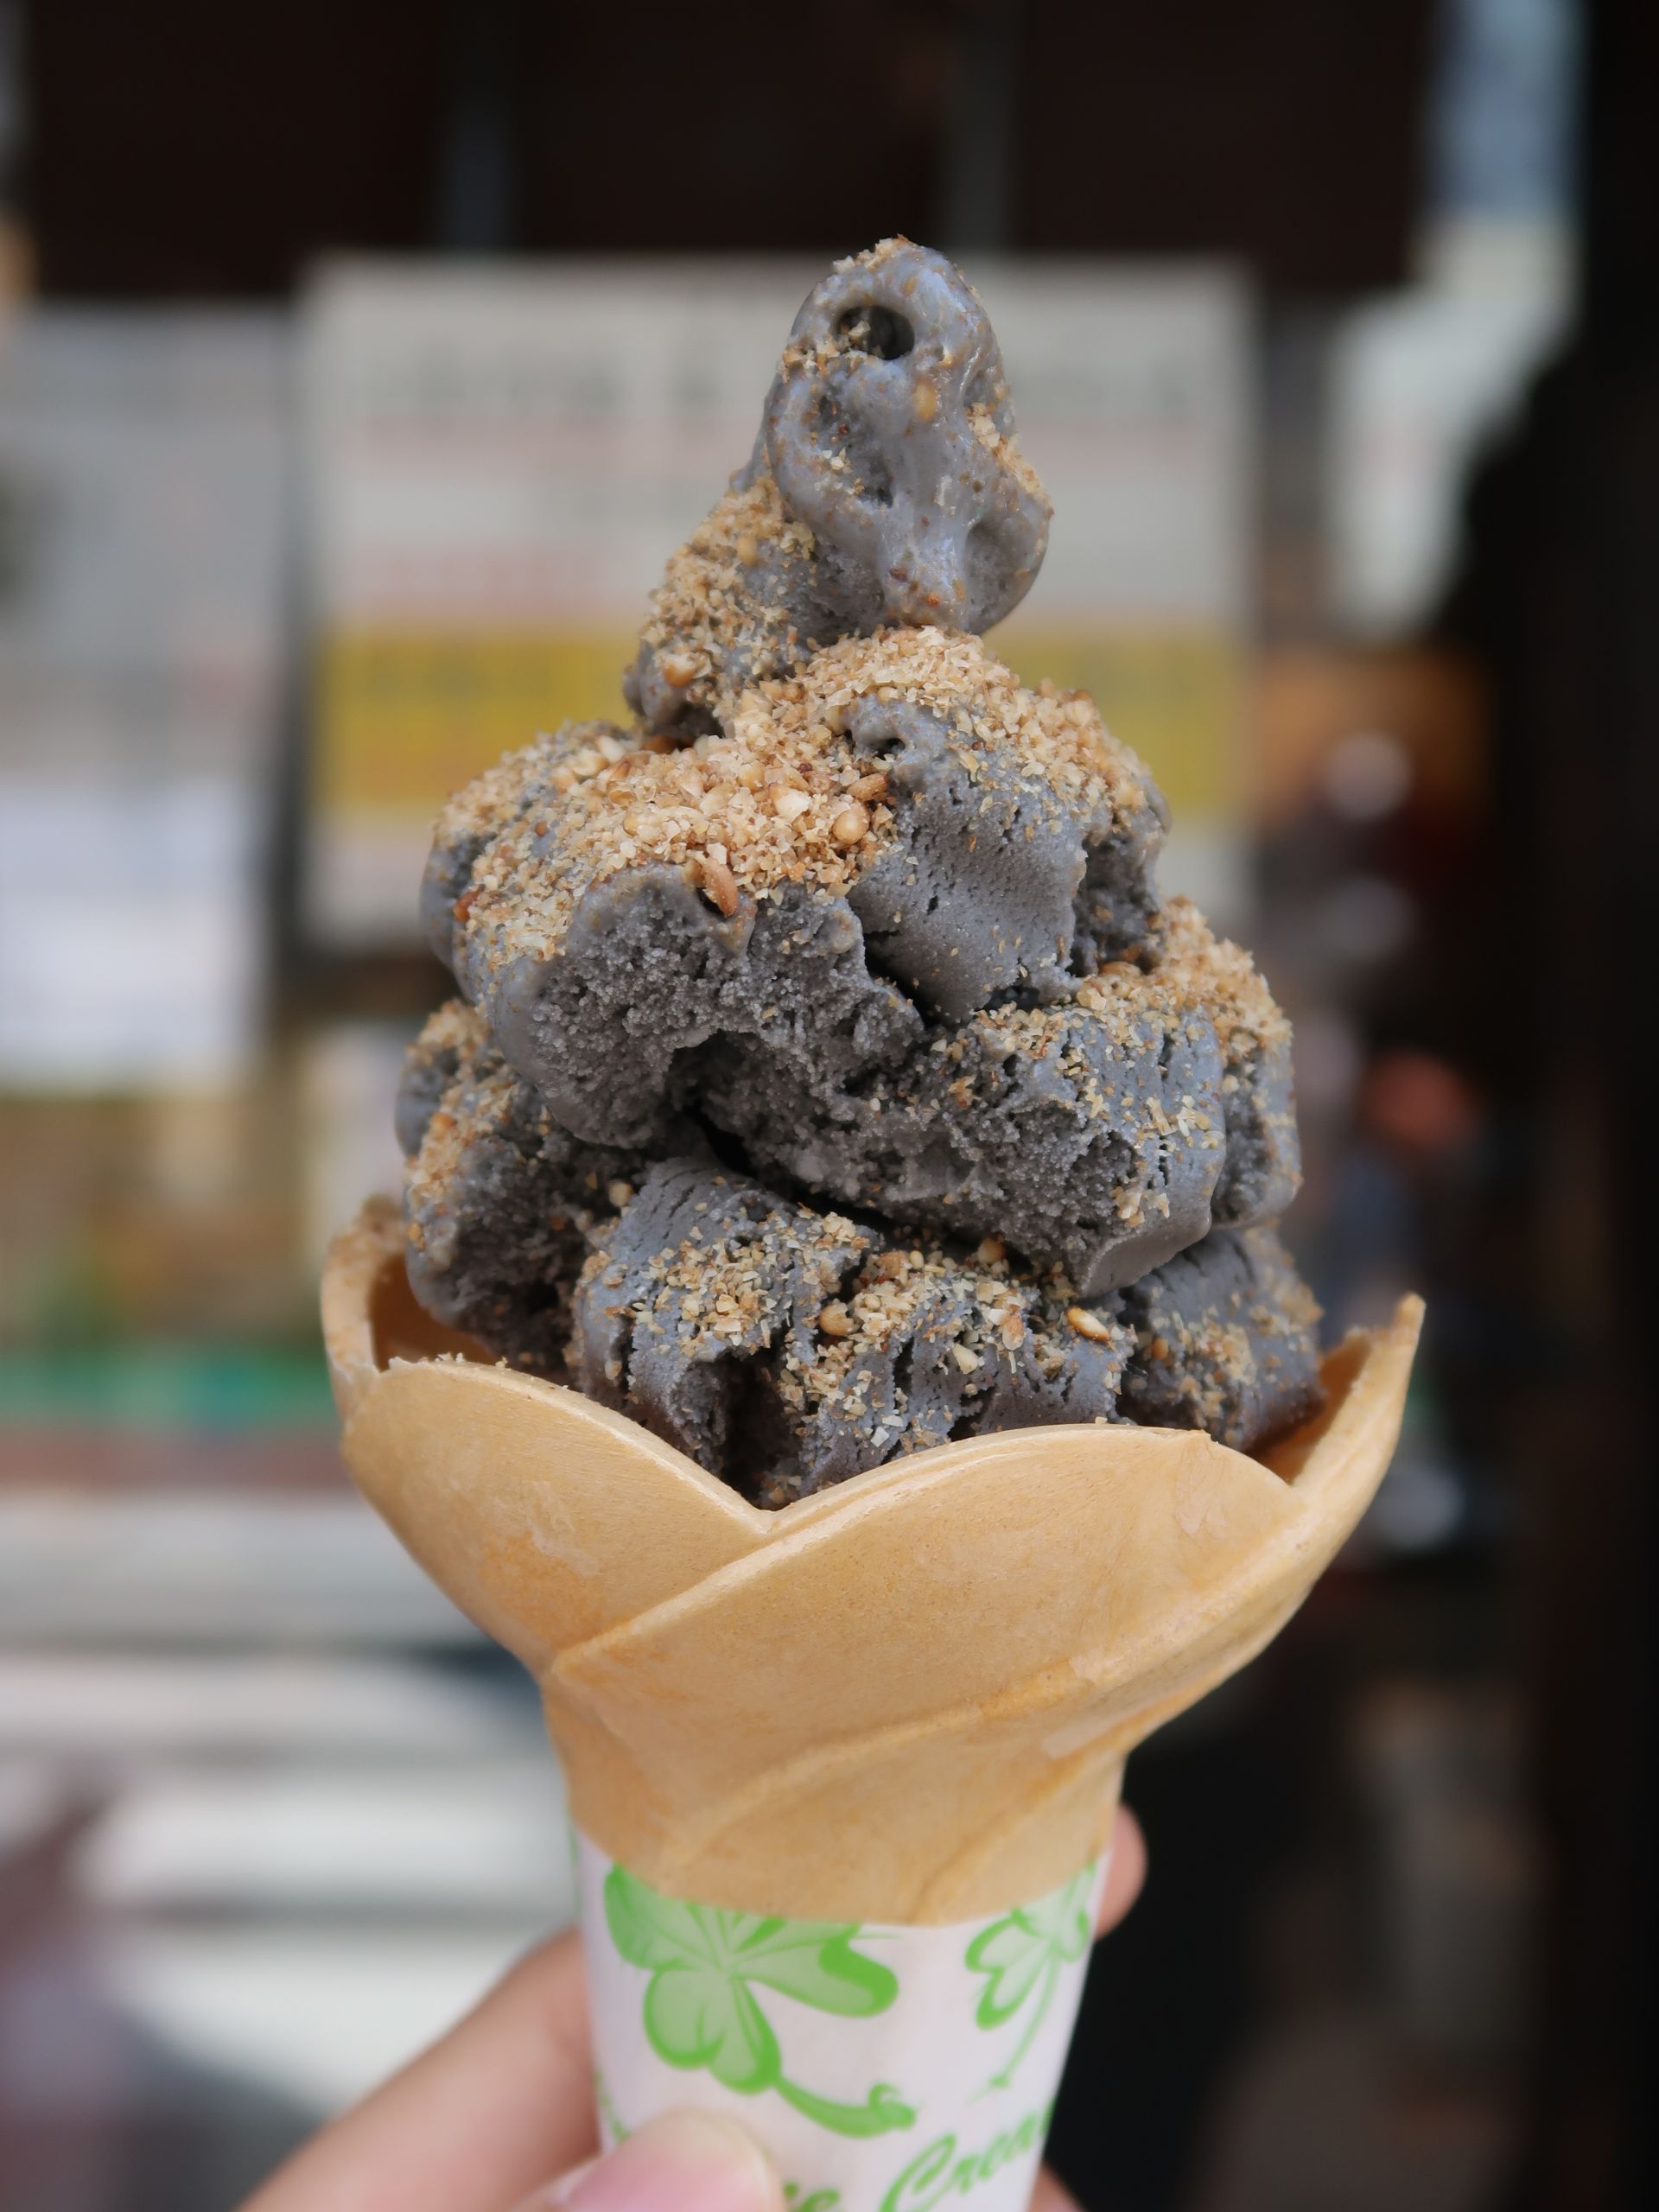 Tokyo ice cream stand's colossal eight-flavor cones might be the